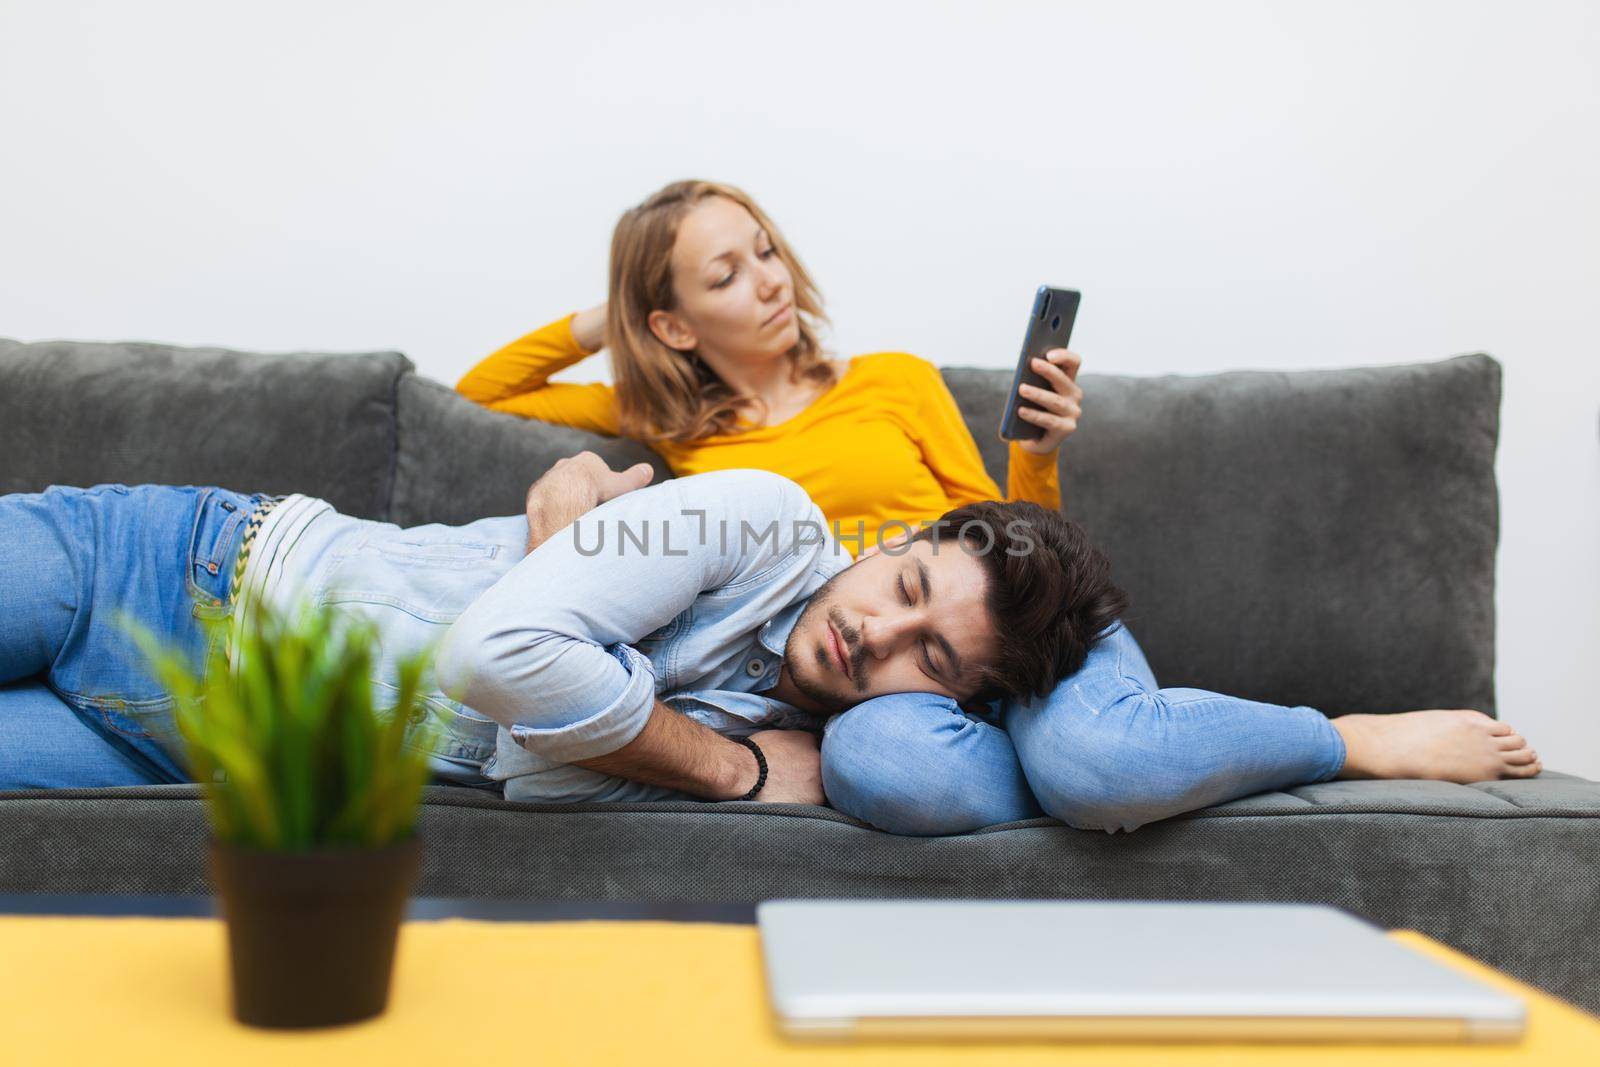 boy naps on girlfriend's lap while she looks at smart phone by kokimk